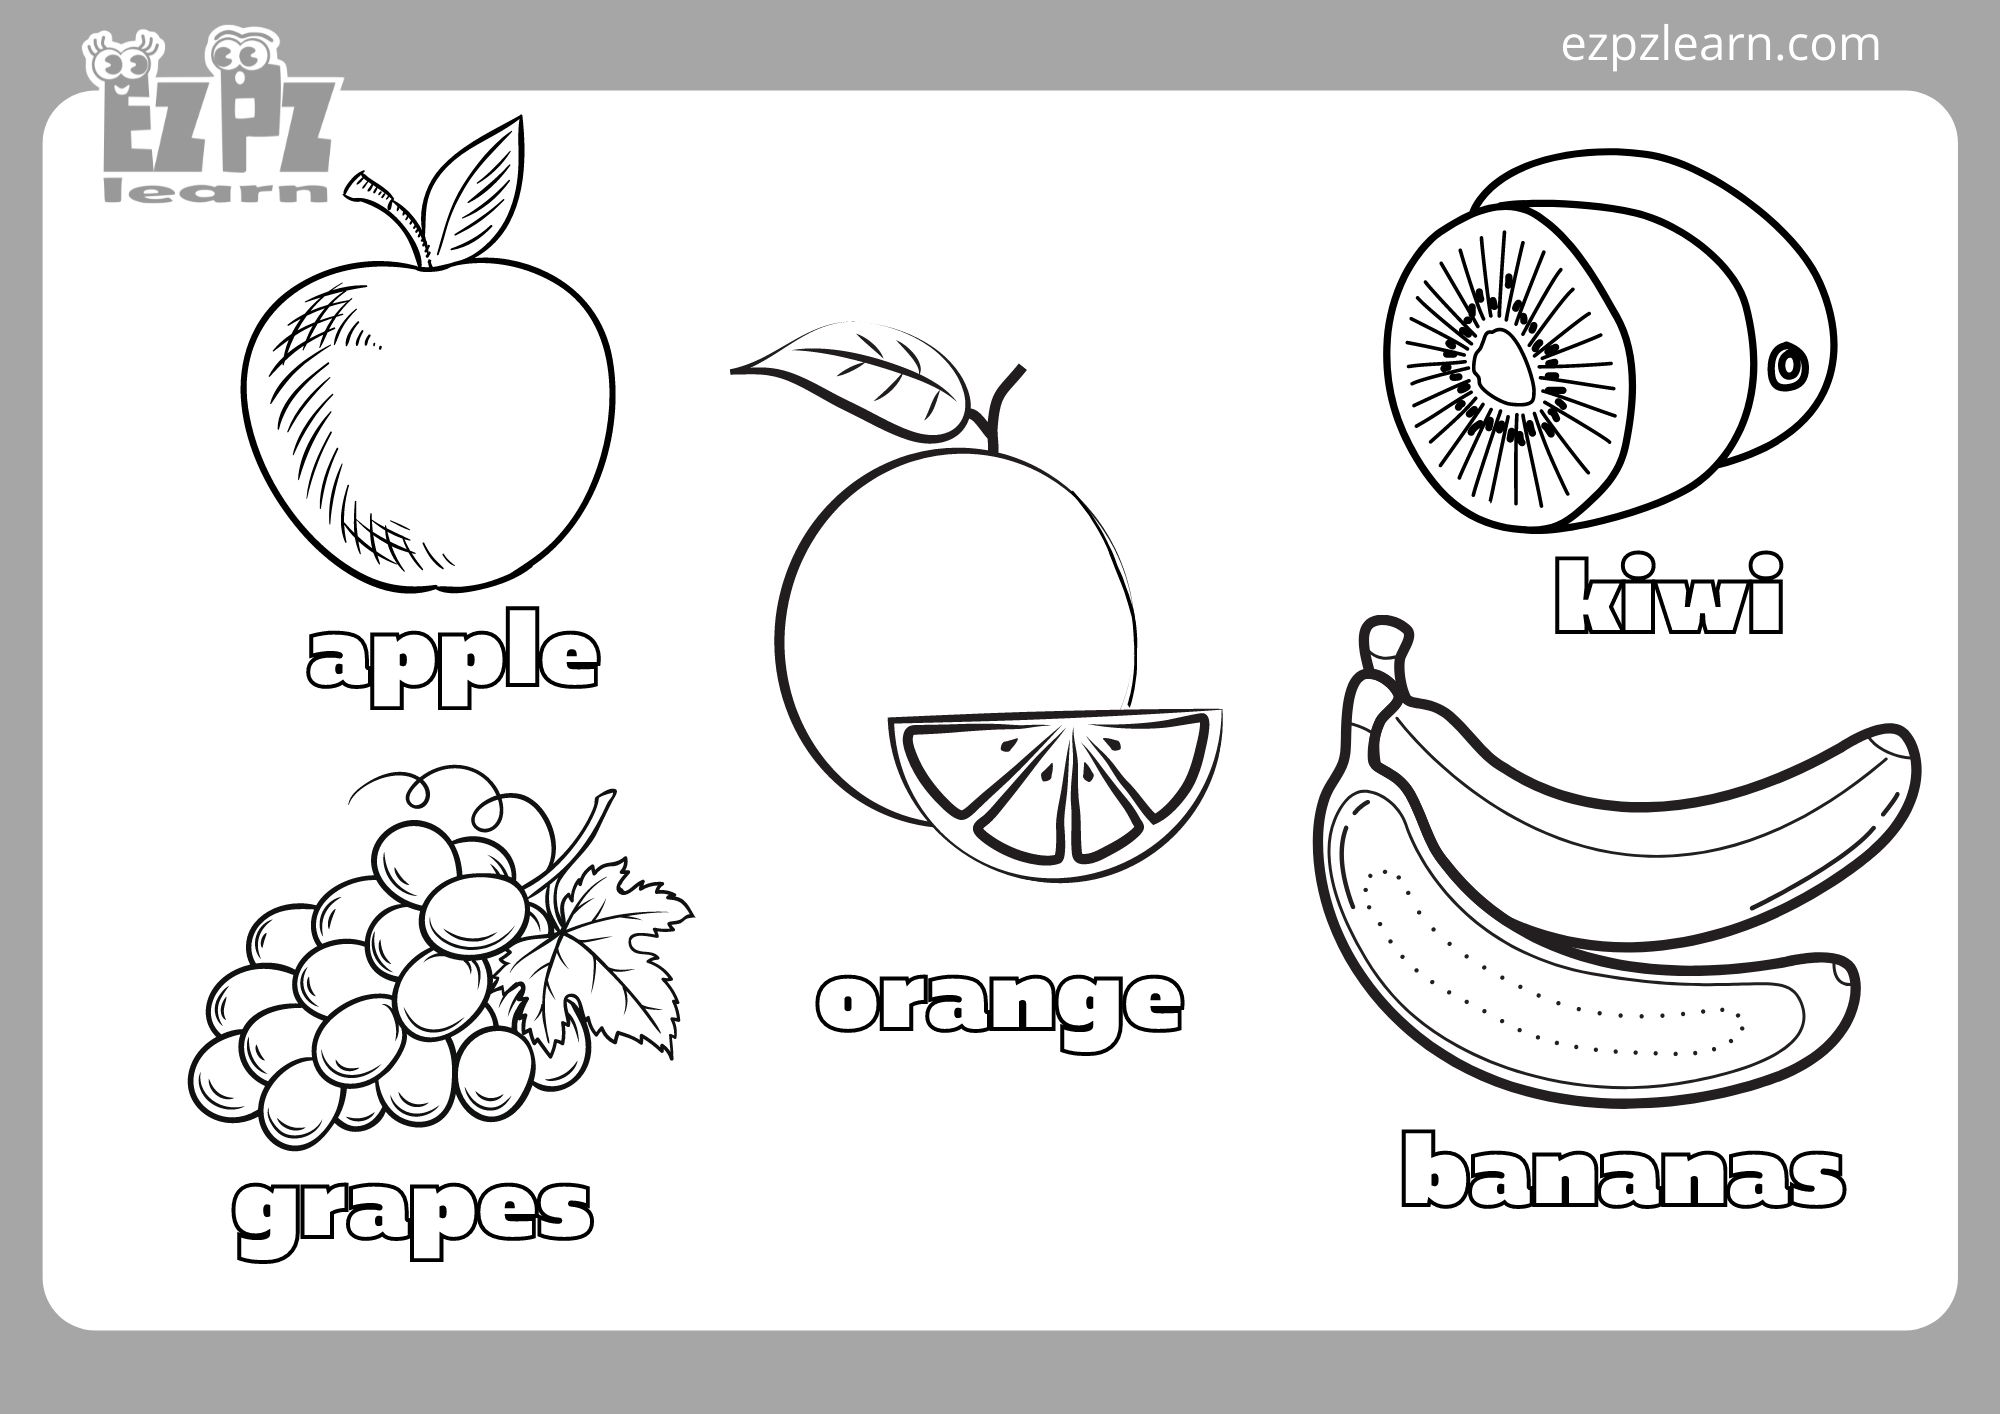 Fruits Colouring Book – Monkey Pen Store